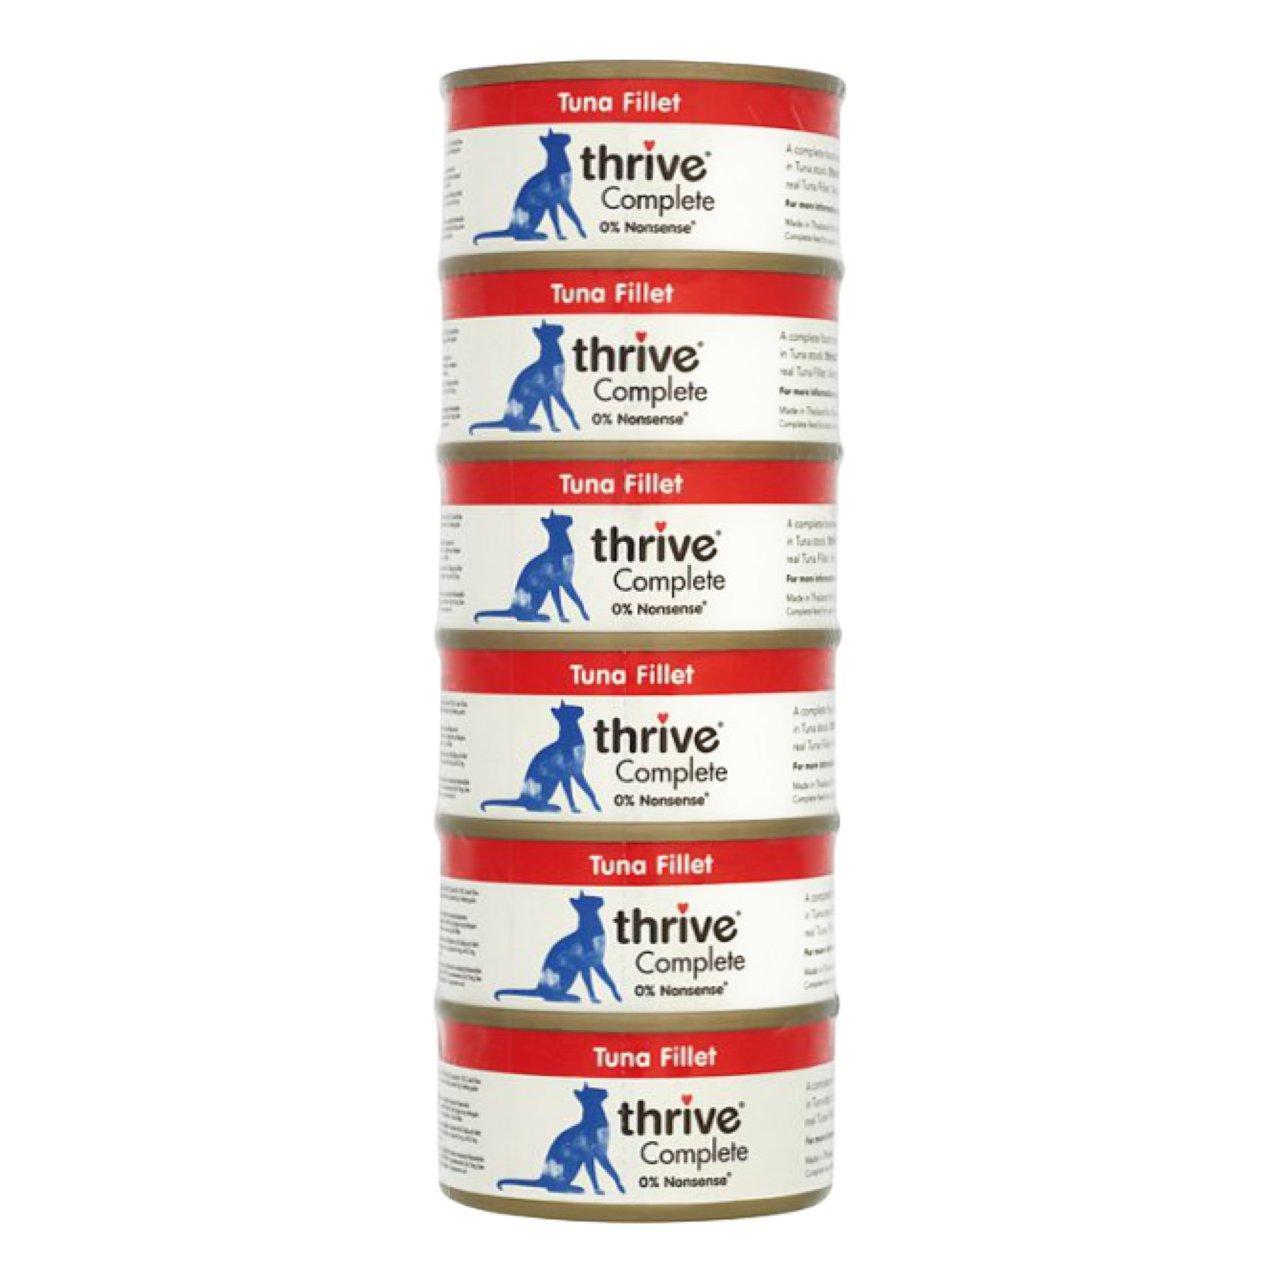 An image of Thrive Complete Tuna Fillet Cat Food